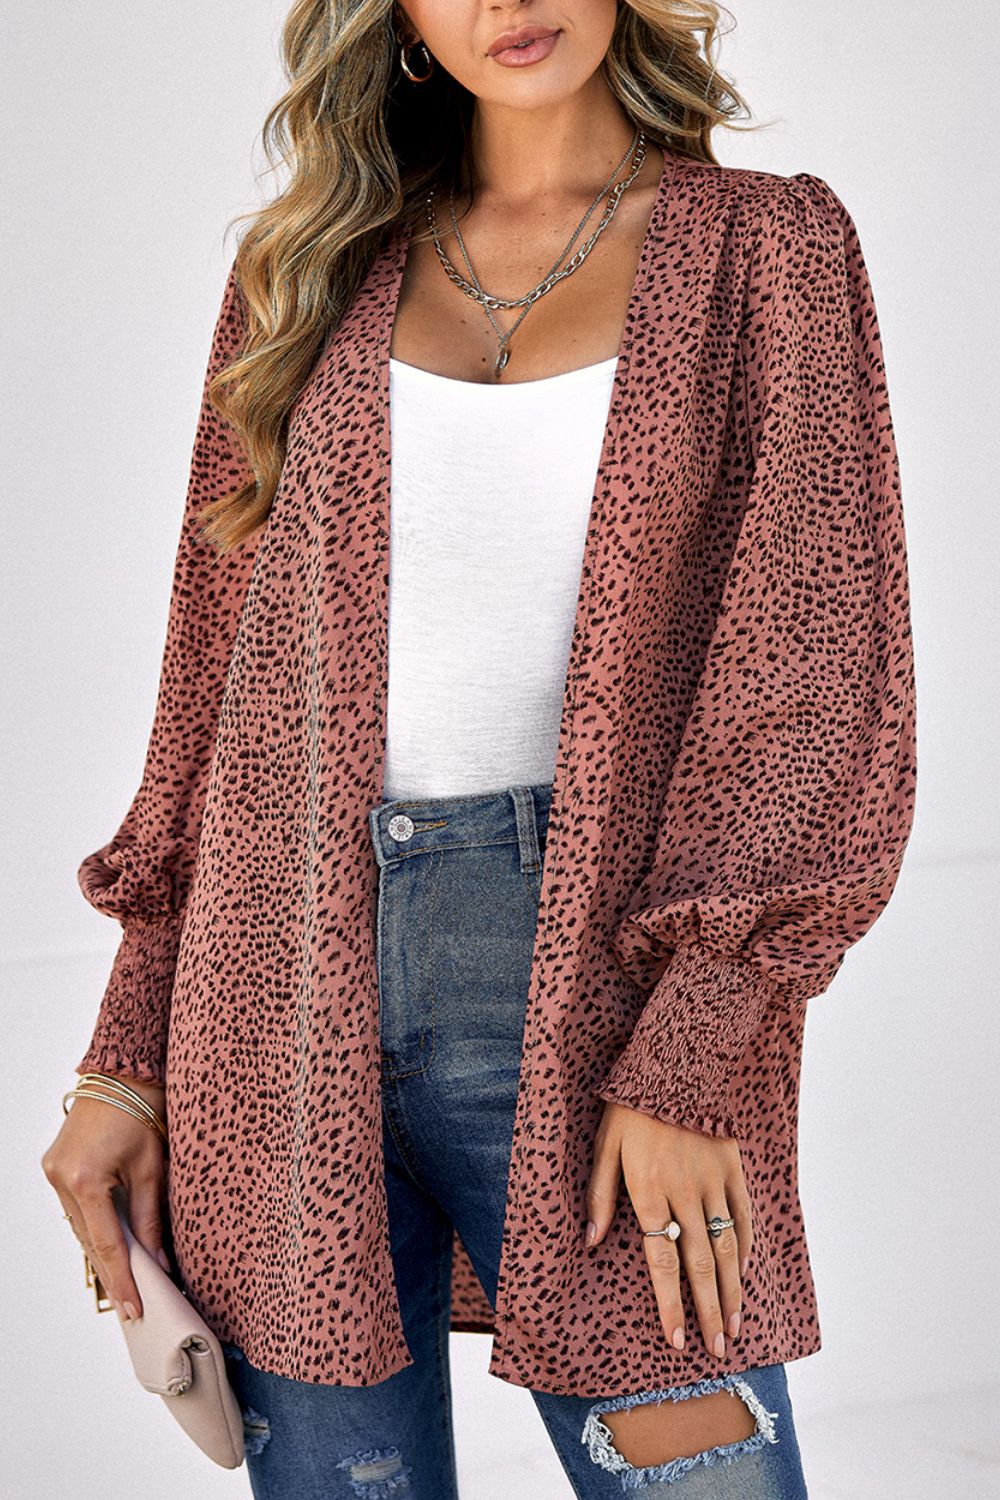 Leopard Print Balloon Sleeve Cardigan - Women’s Clothing & Accessories - Shirts & Tops - 5 - 2024